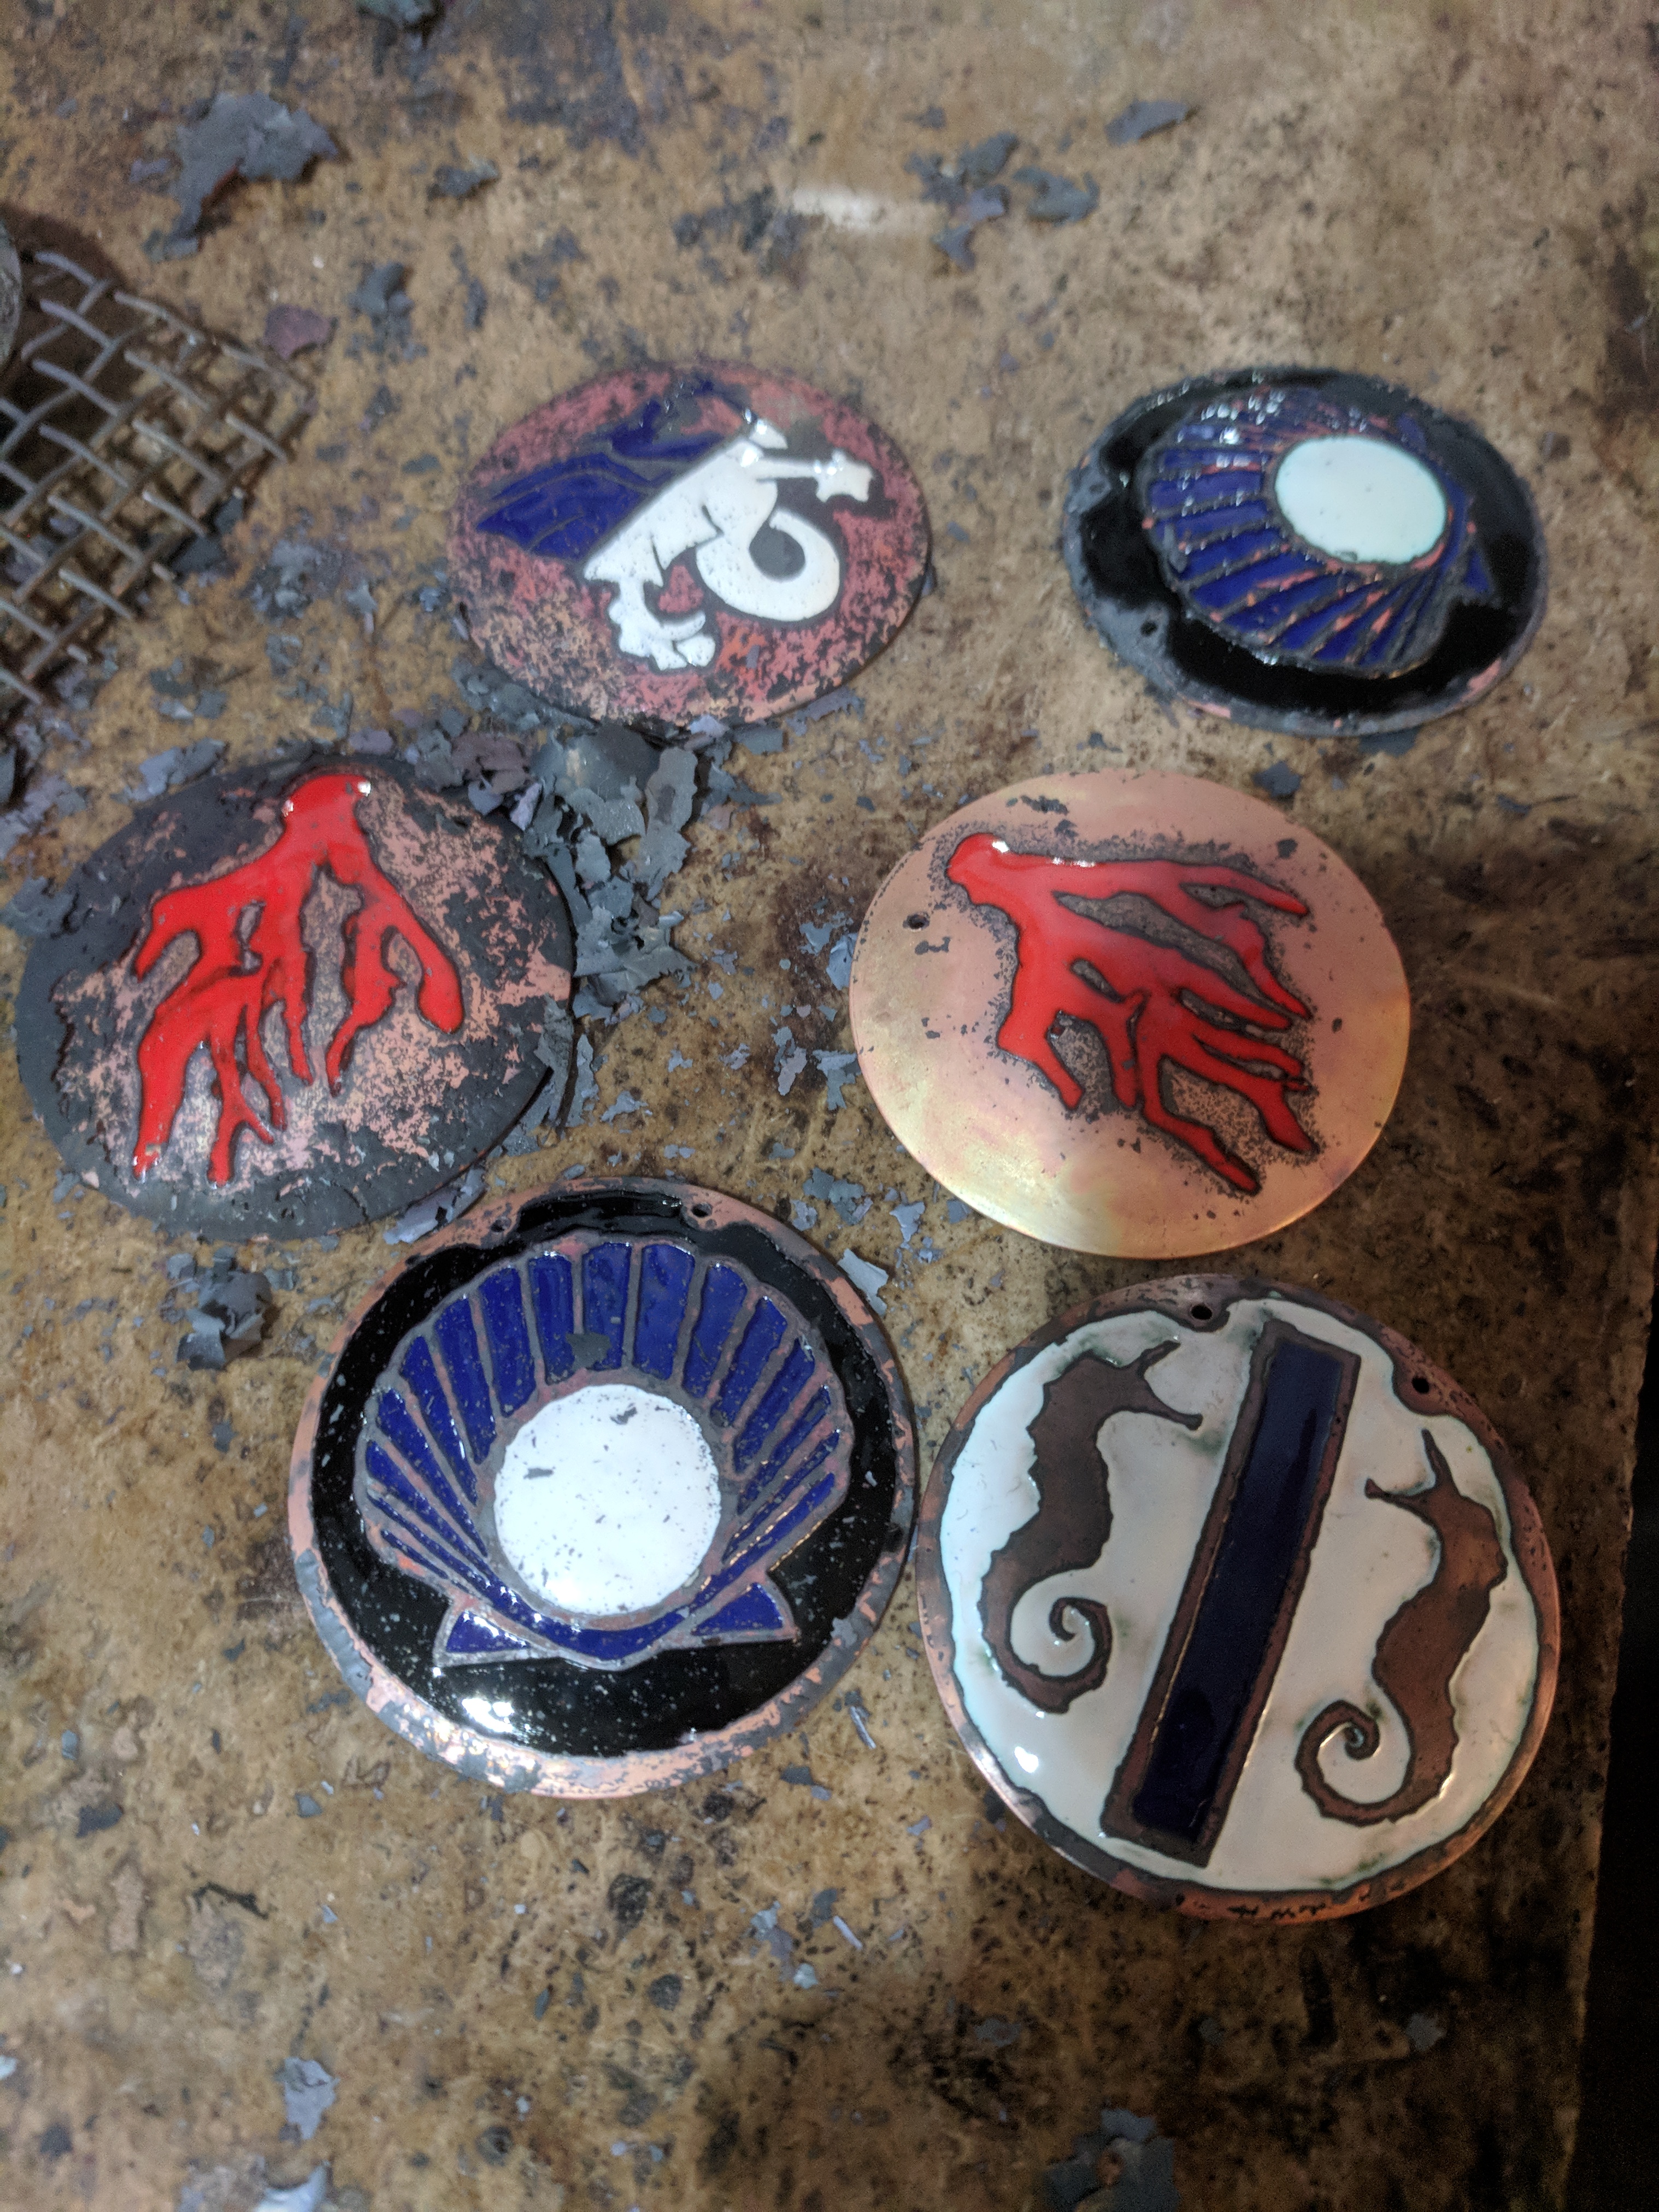 Award medallions after firing and cooling